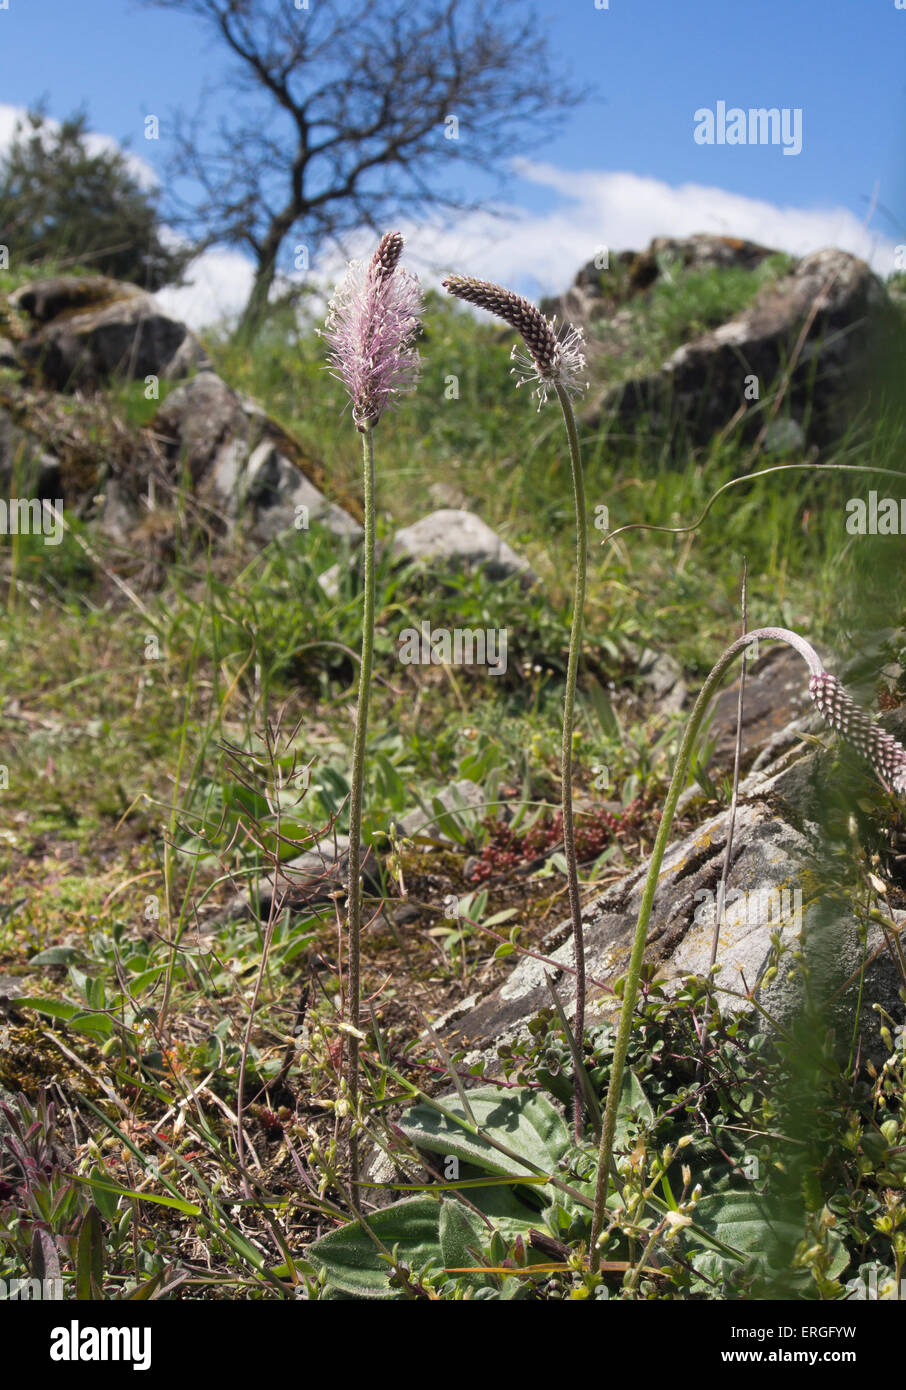 Plantago media, hoary plantain, traditionally a medicinal plant has delicate white to purple flower, should be admired close up, Oslo Norway Stock Photo